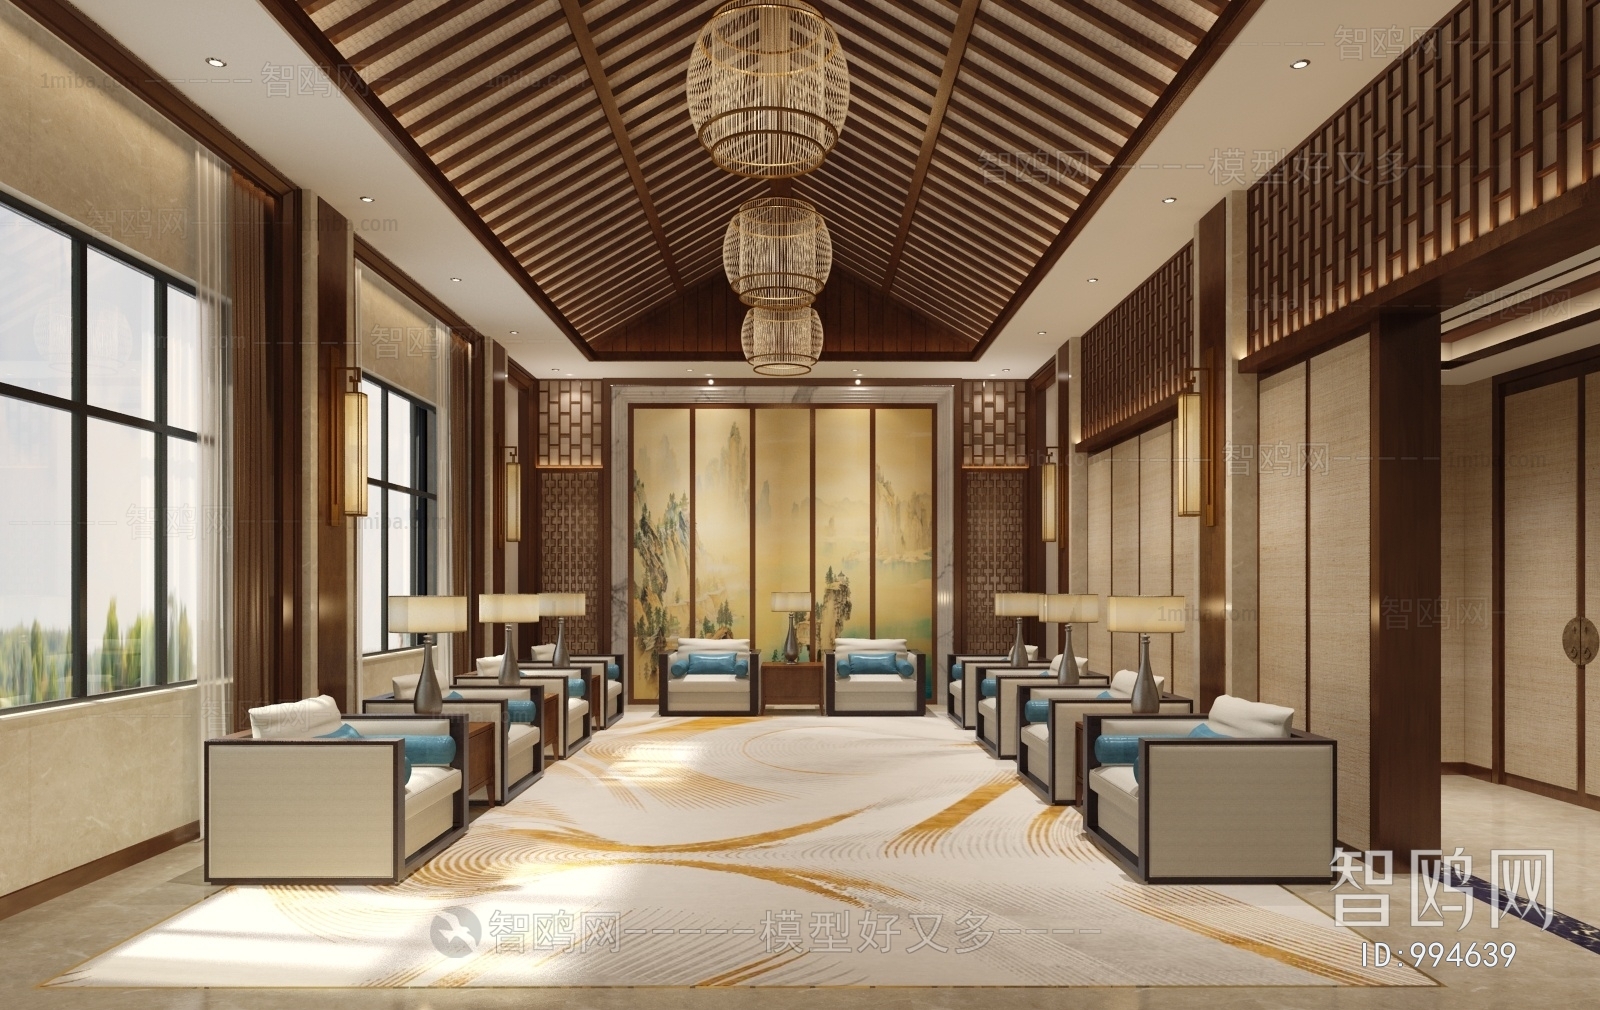 New Chinese Style Reception Room